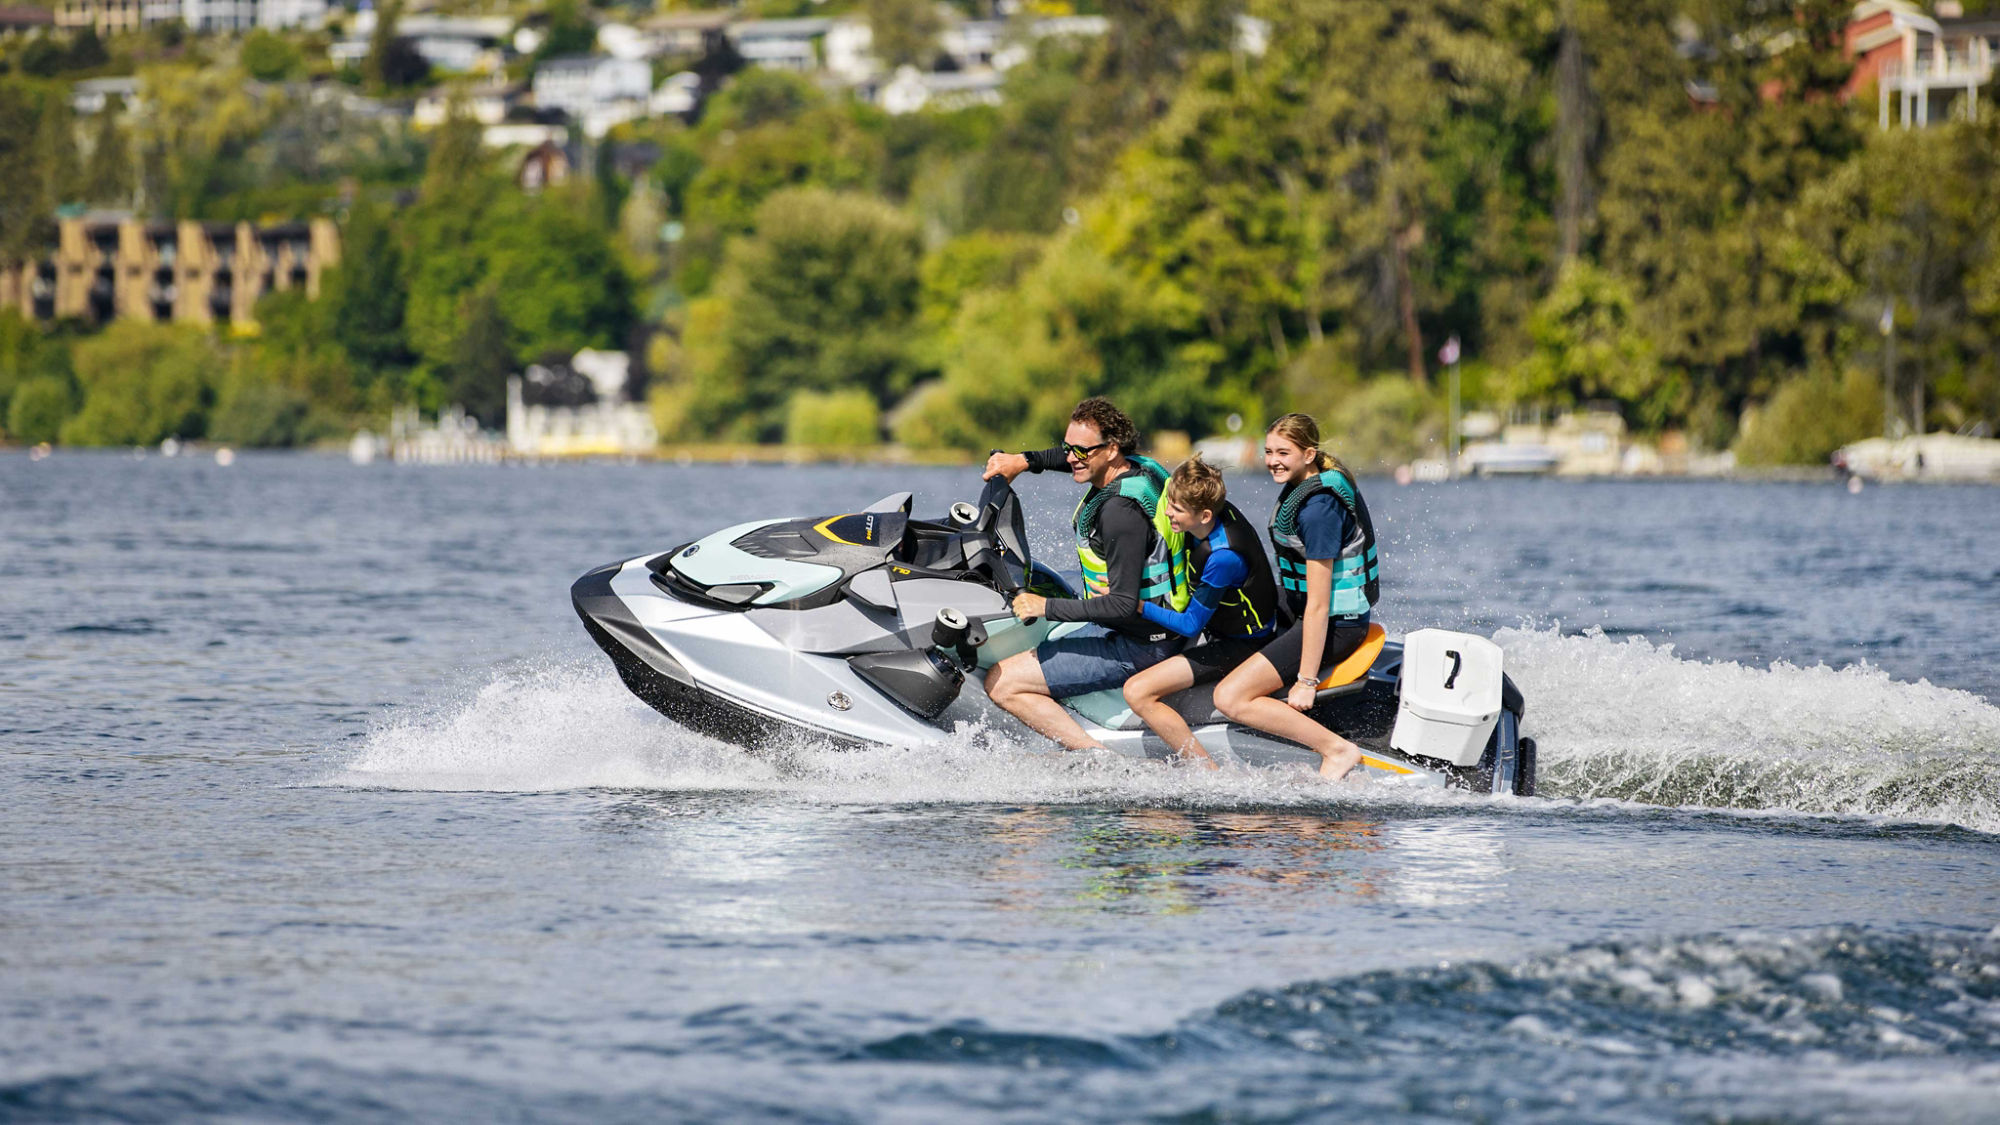 Family riding a Sea-Doo watercraft in the water